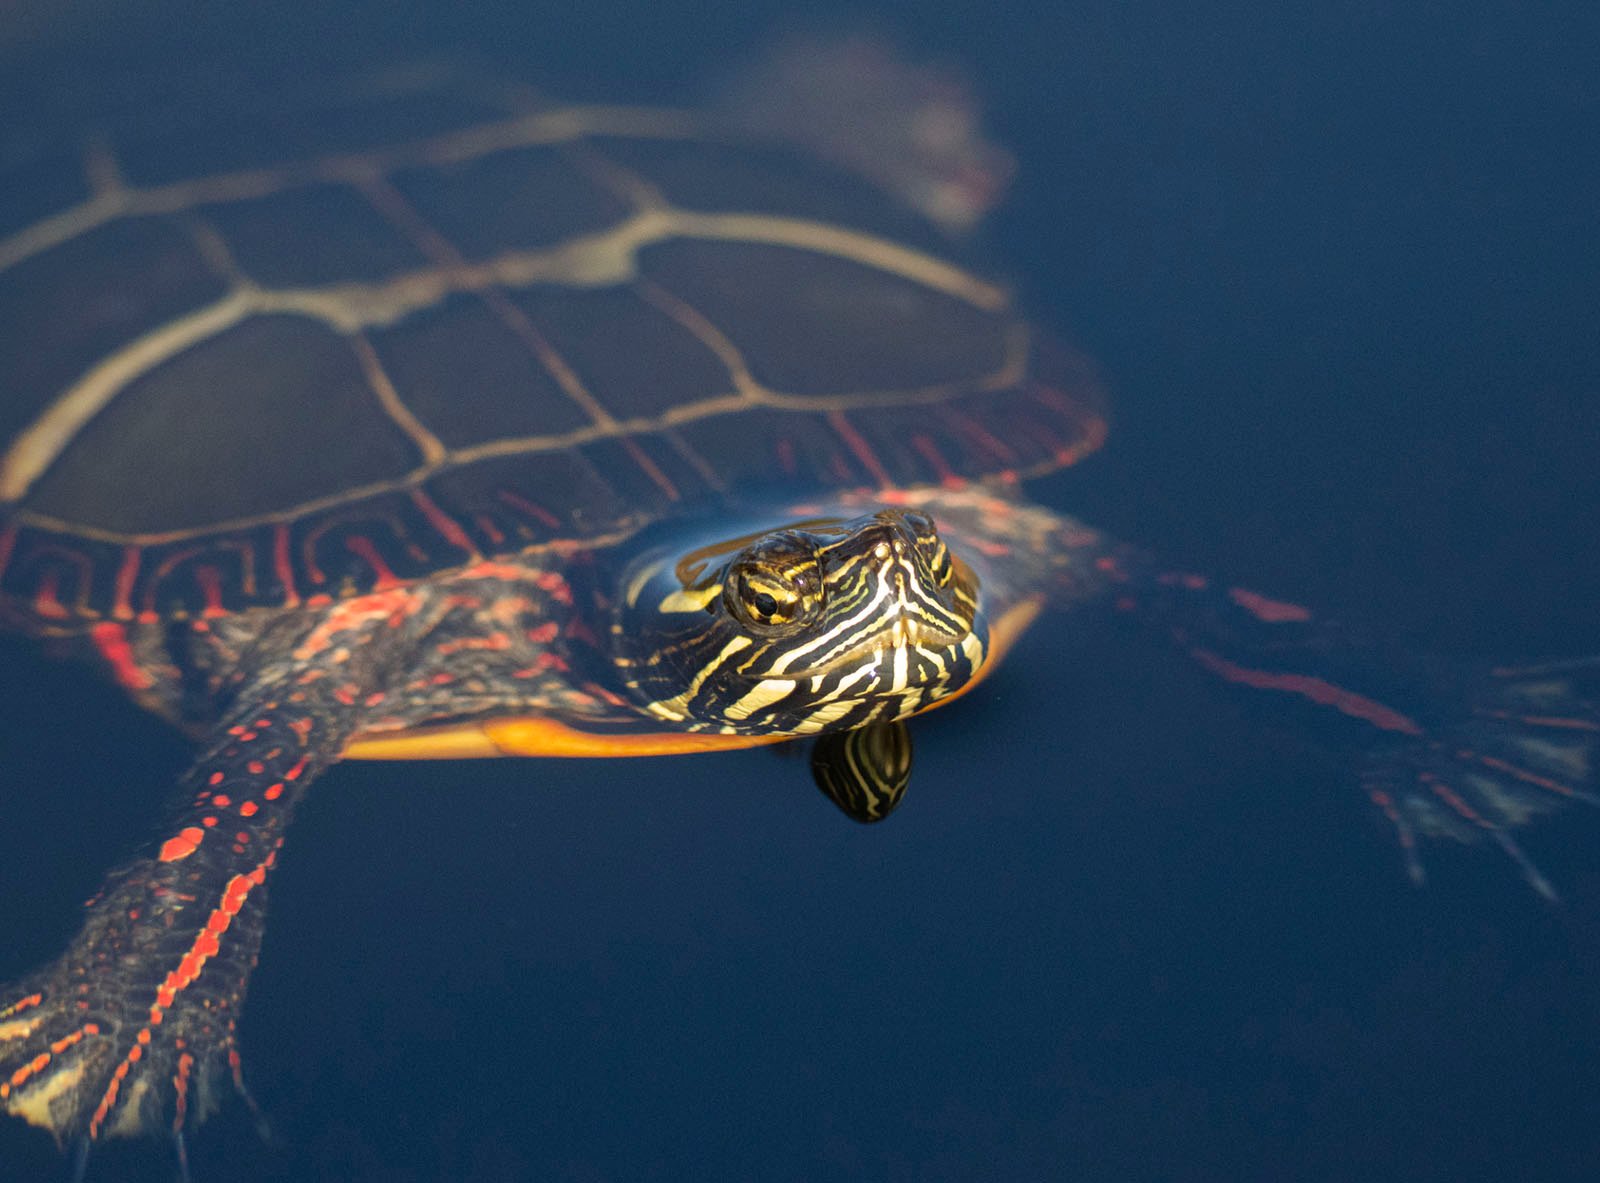 A painted turtle swimming in dark water, with its head and brightly patterned shell visible above the surface. reflections shimmer subtly around it.